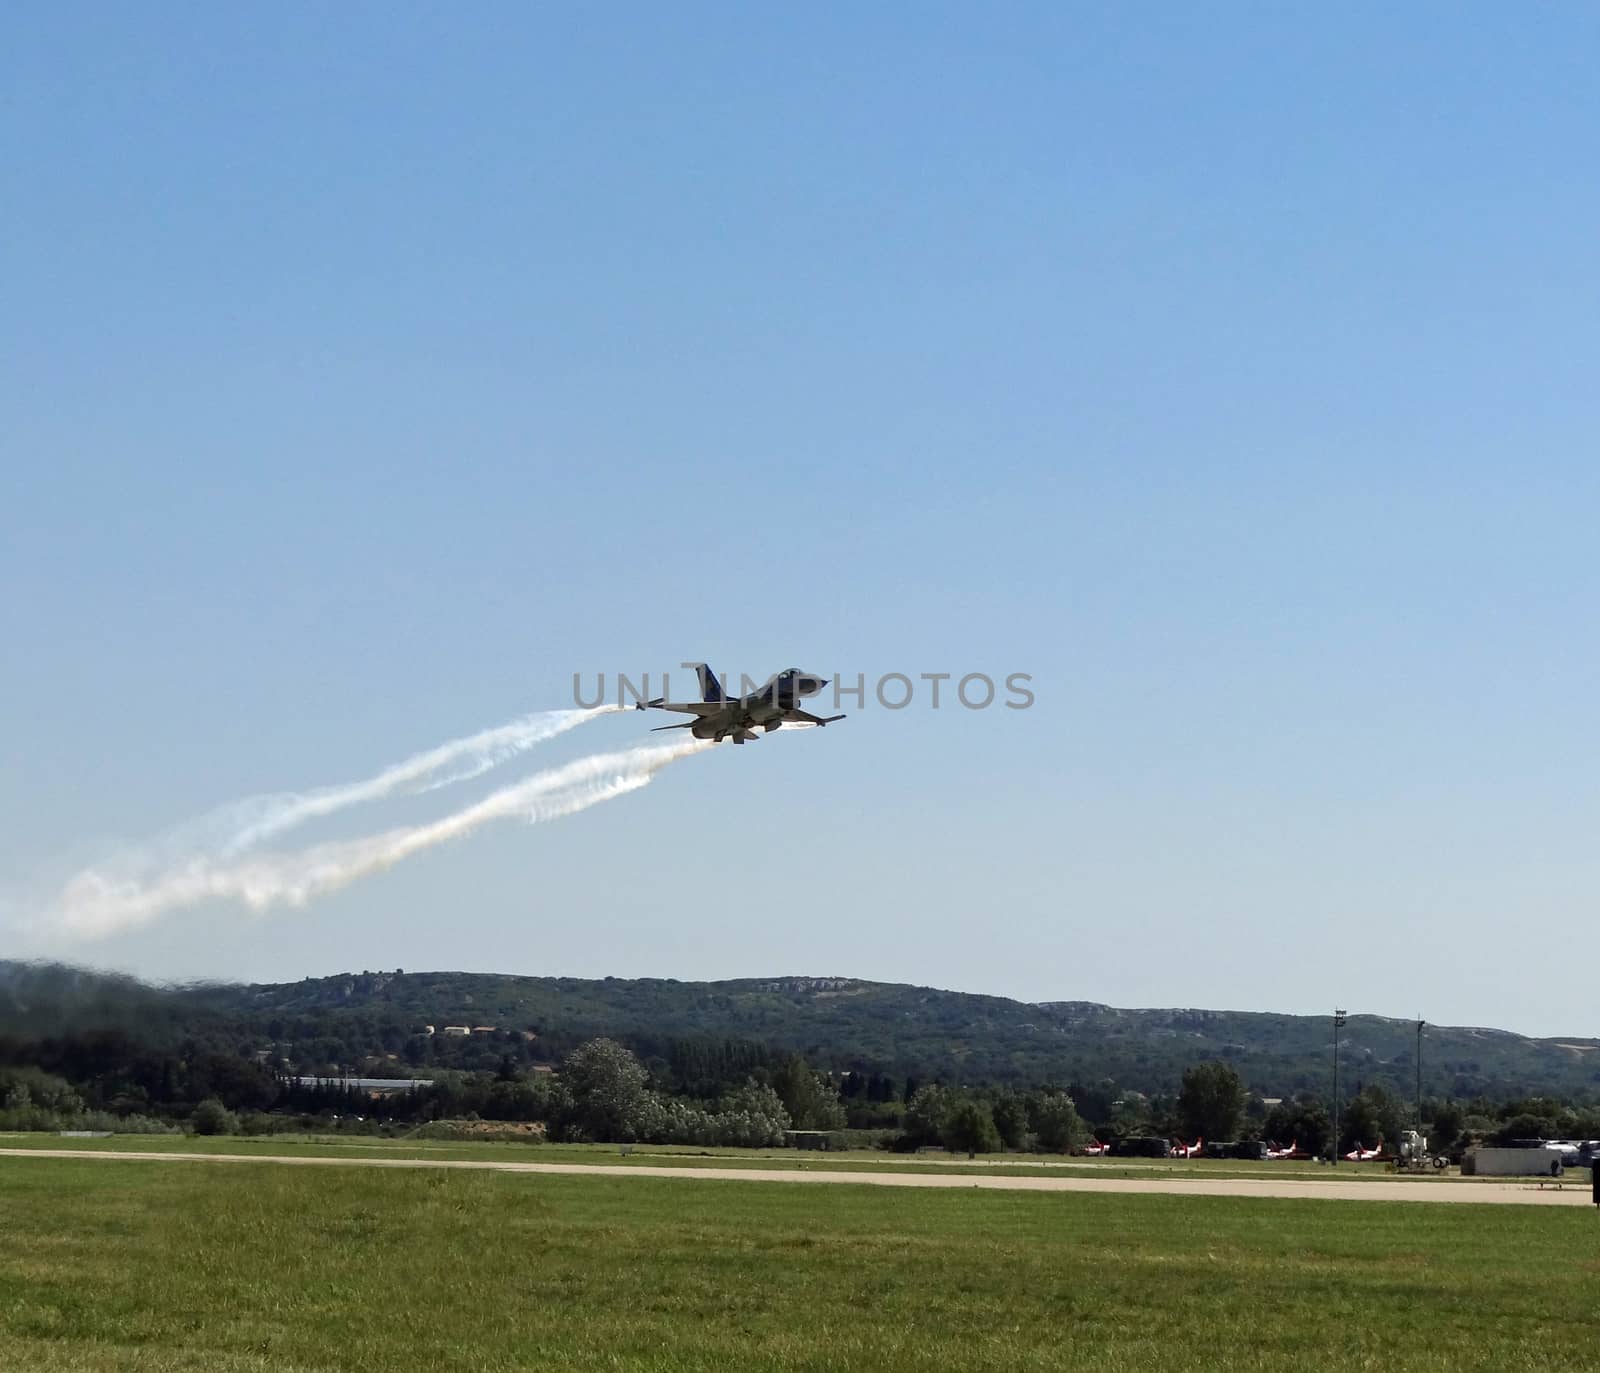 rafale at an airshow in france